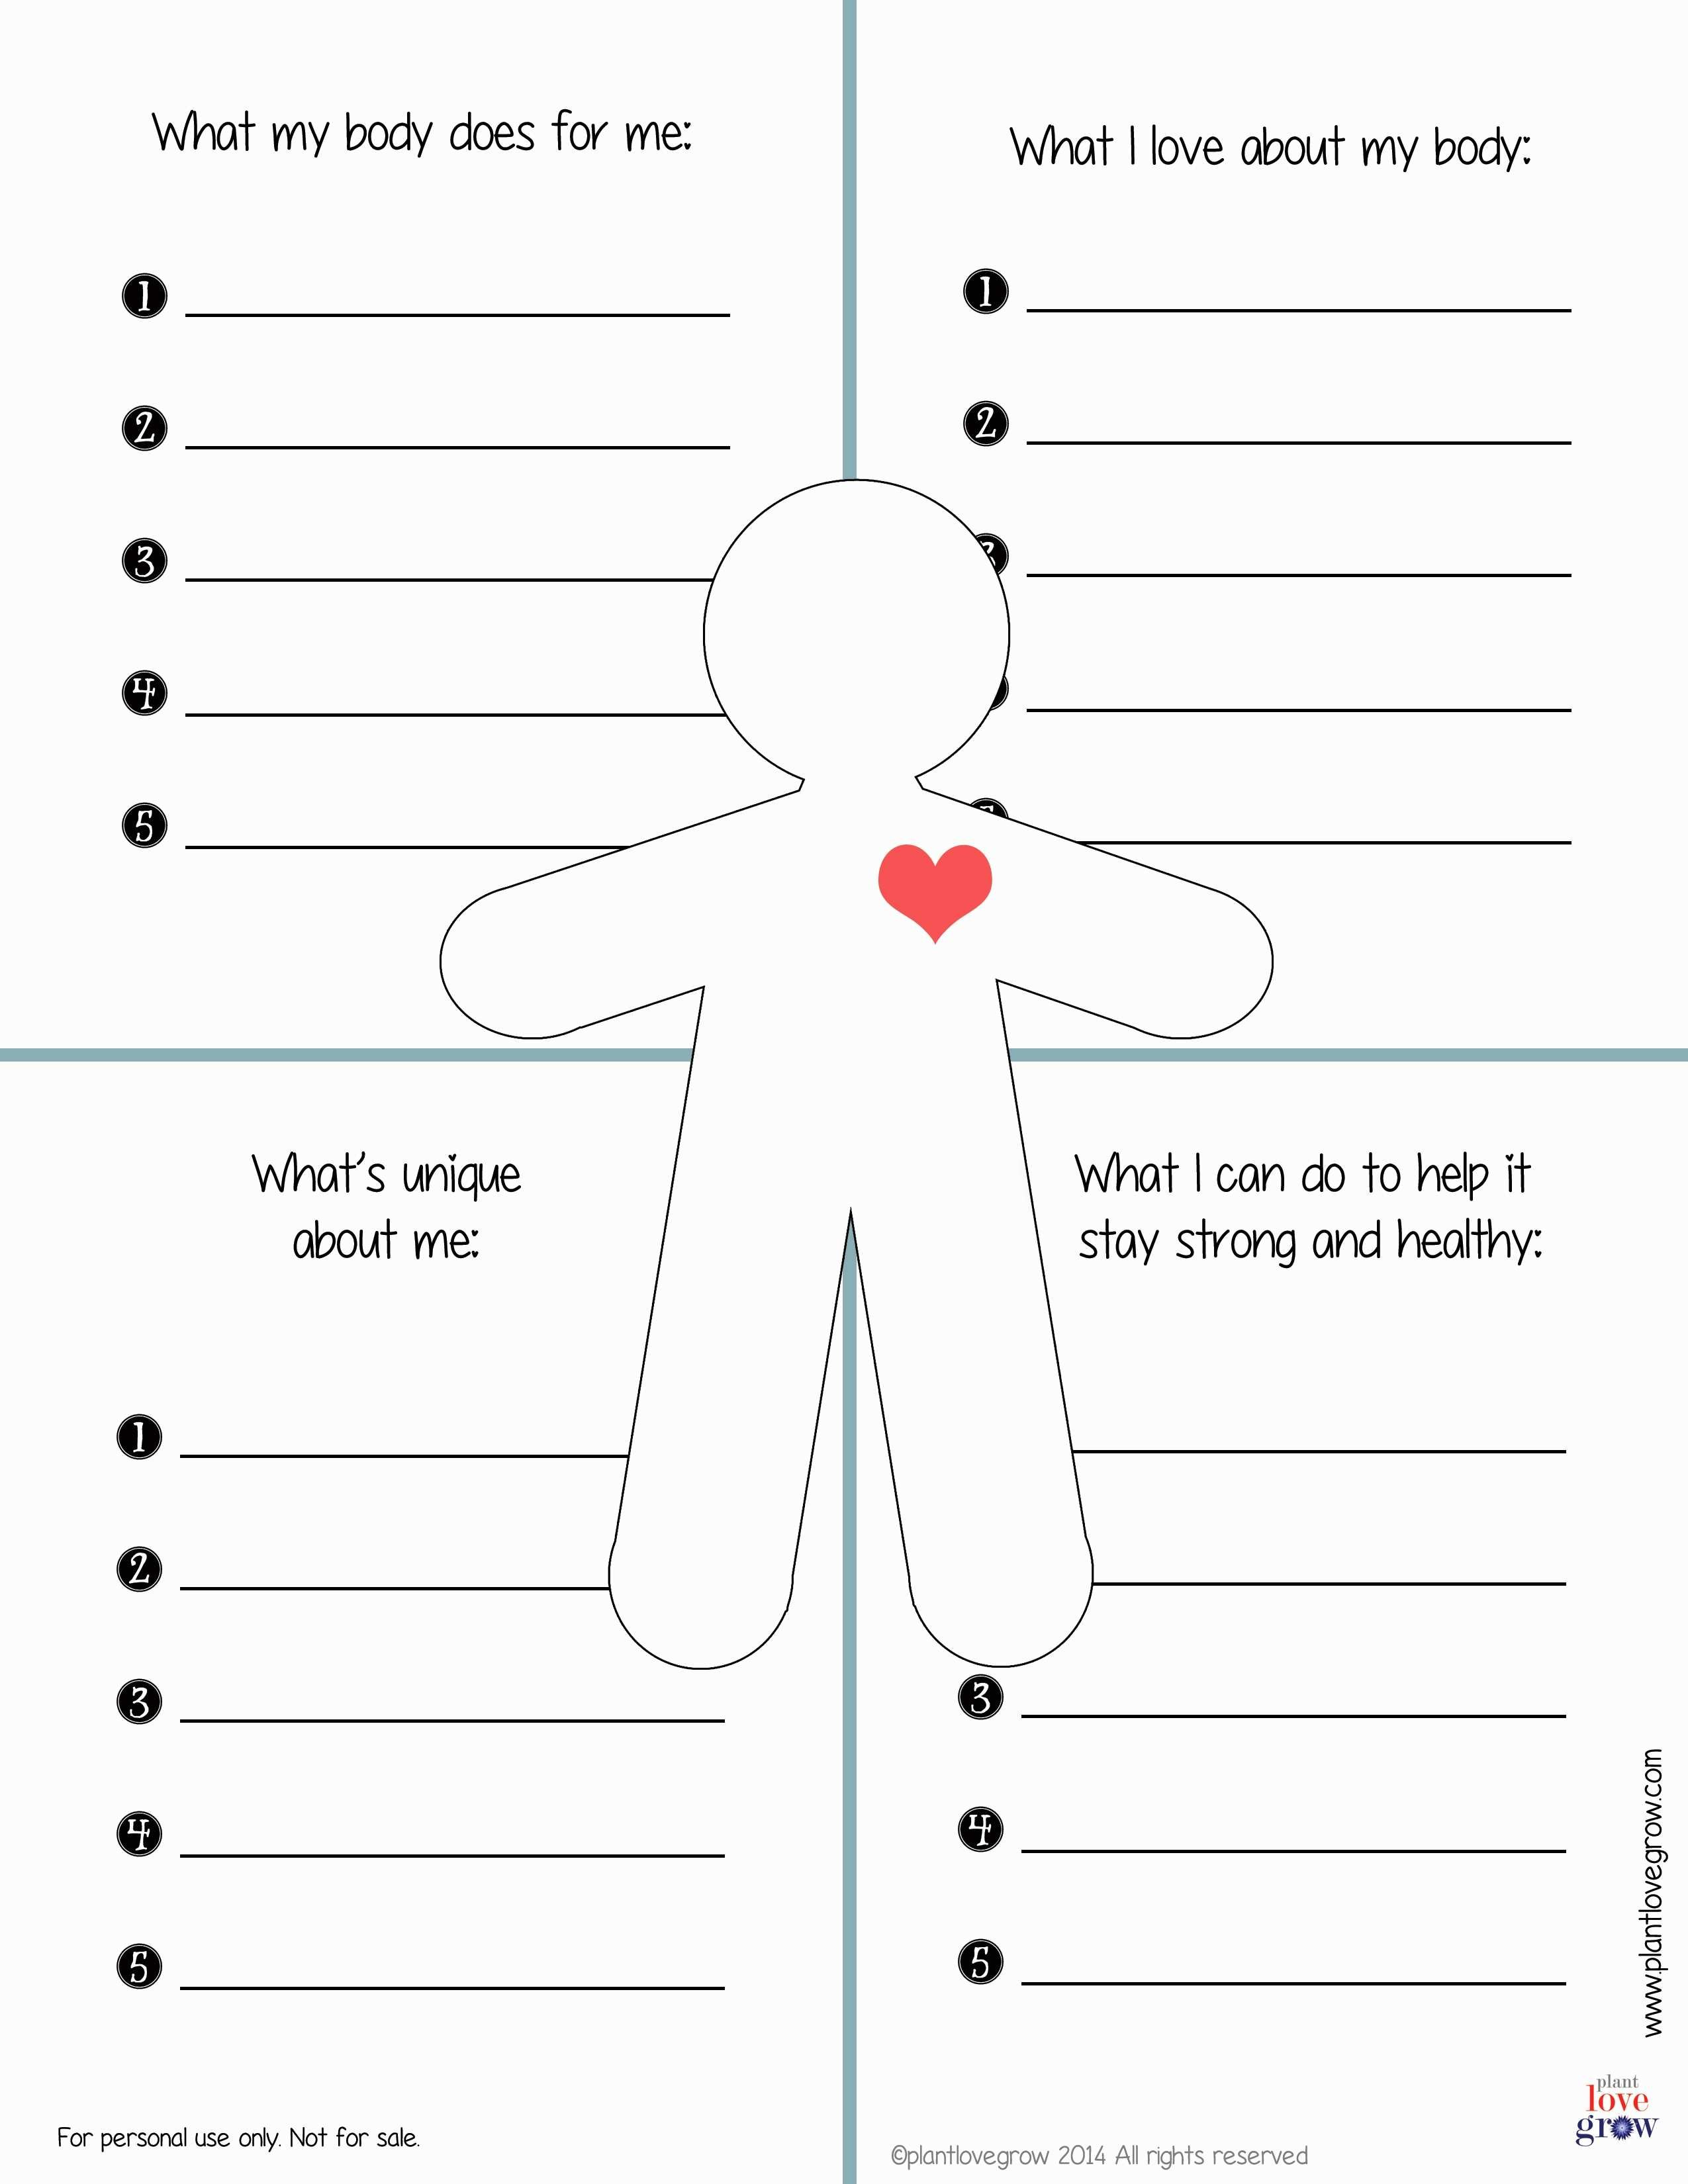 30 Self Esteem Worksheets To Print  Kittybabylove Throughout Self Esteem Worksheets For Kids